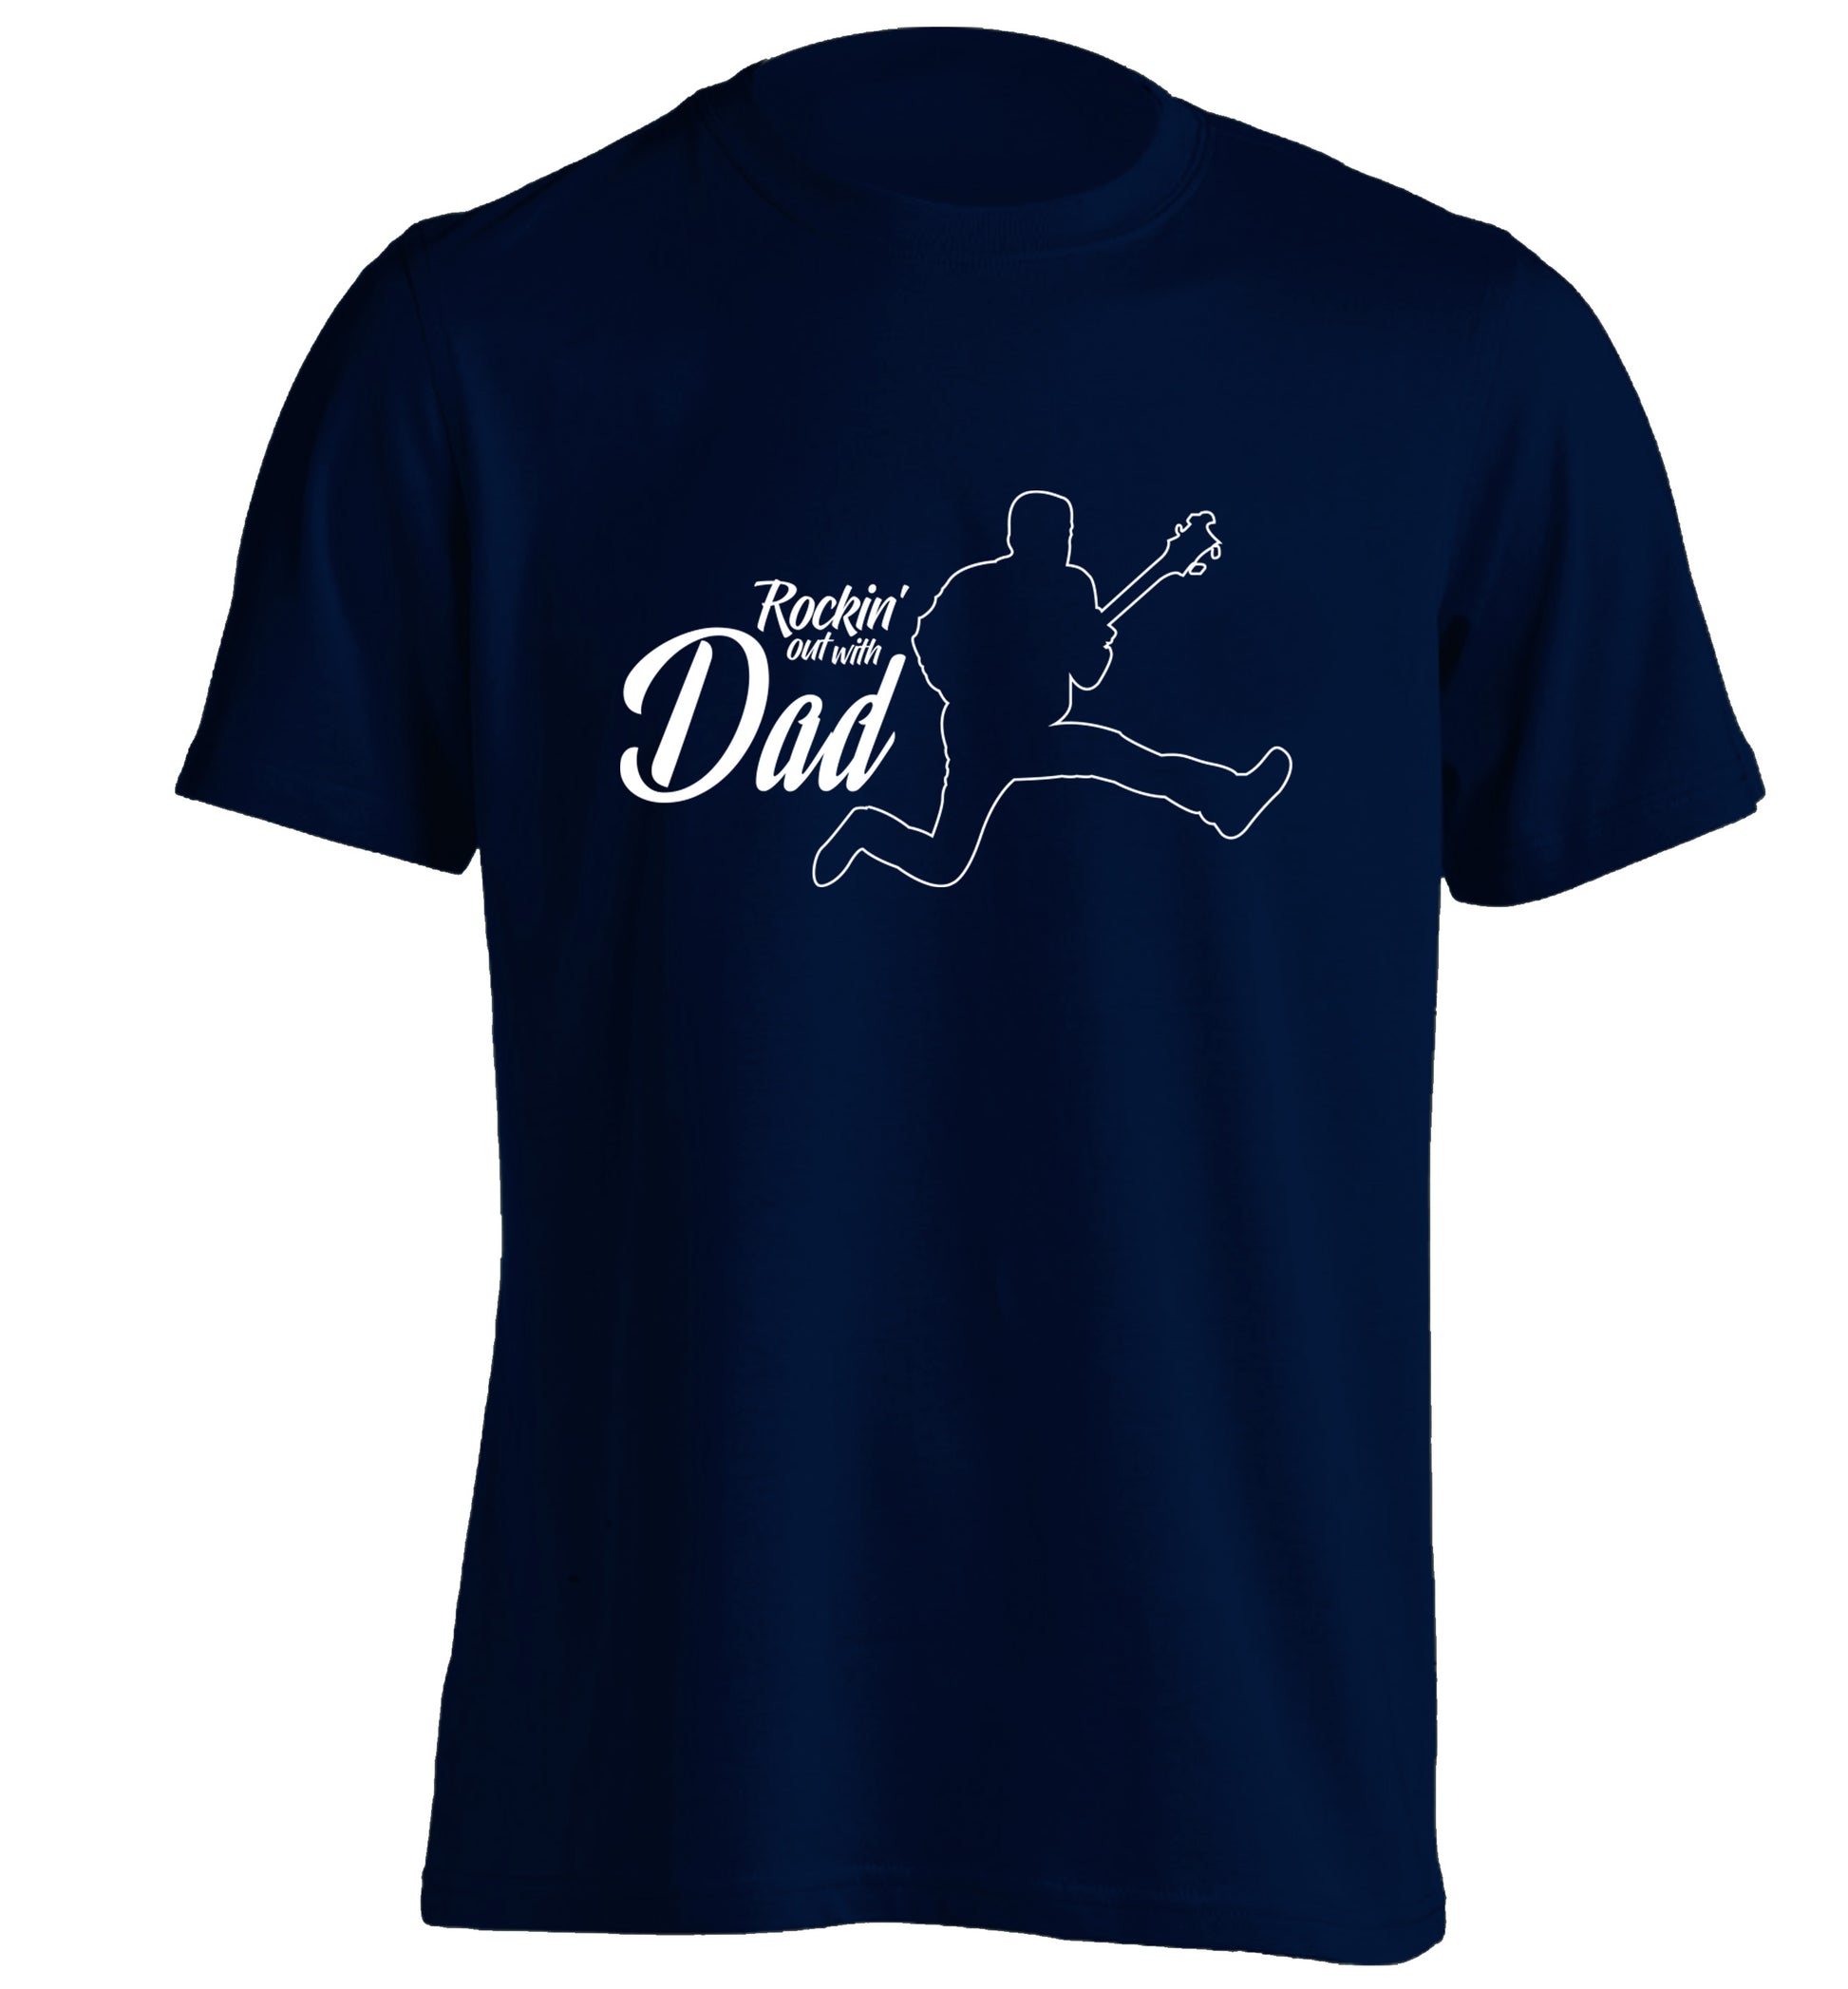 Rockin out with dad adults unisex navy Tshirt 2XL